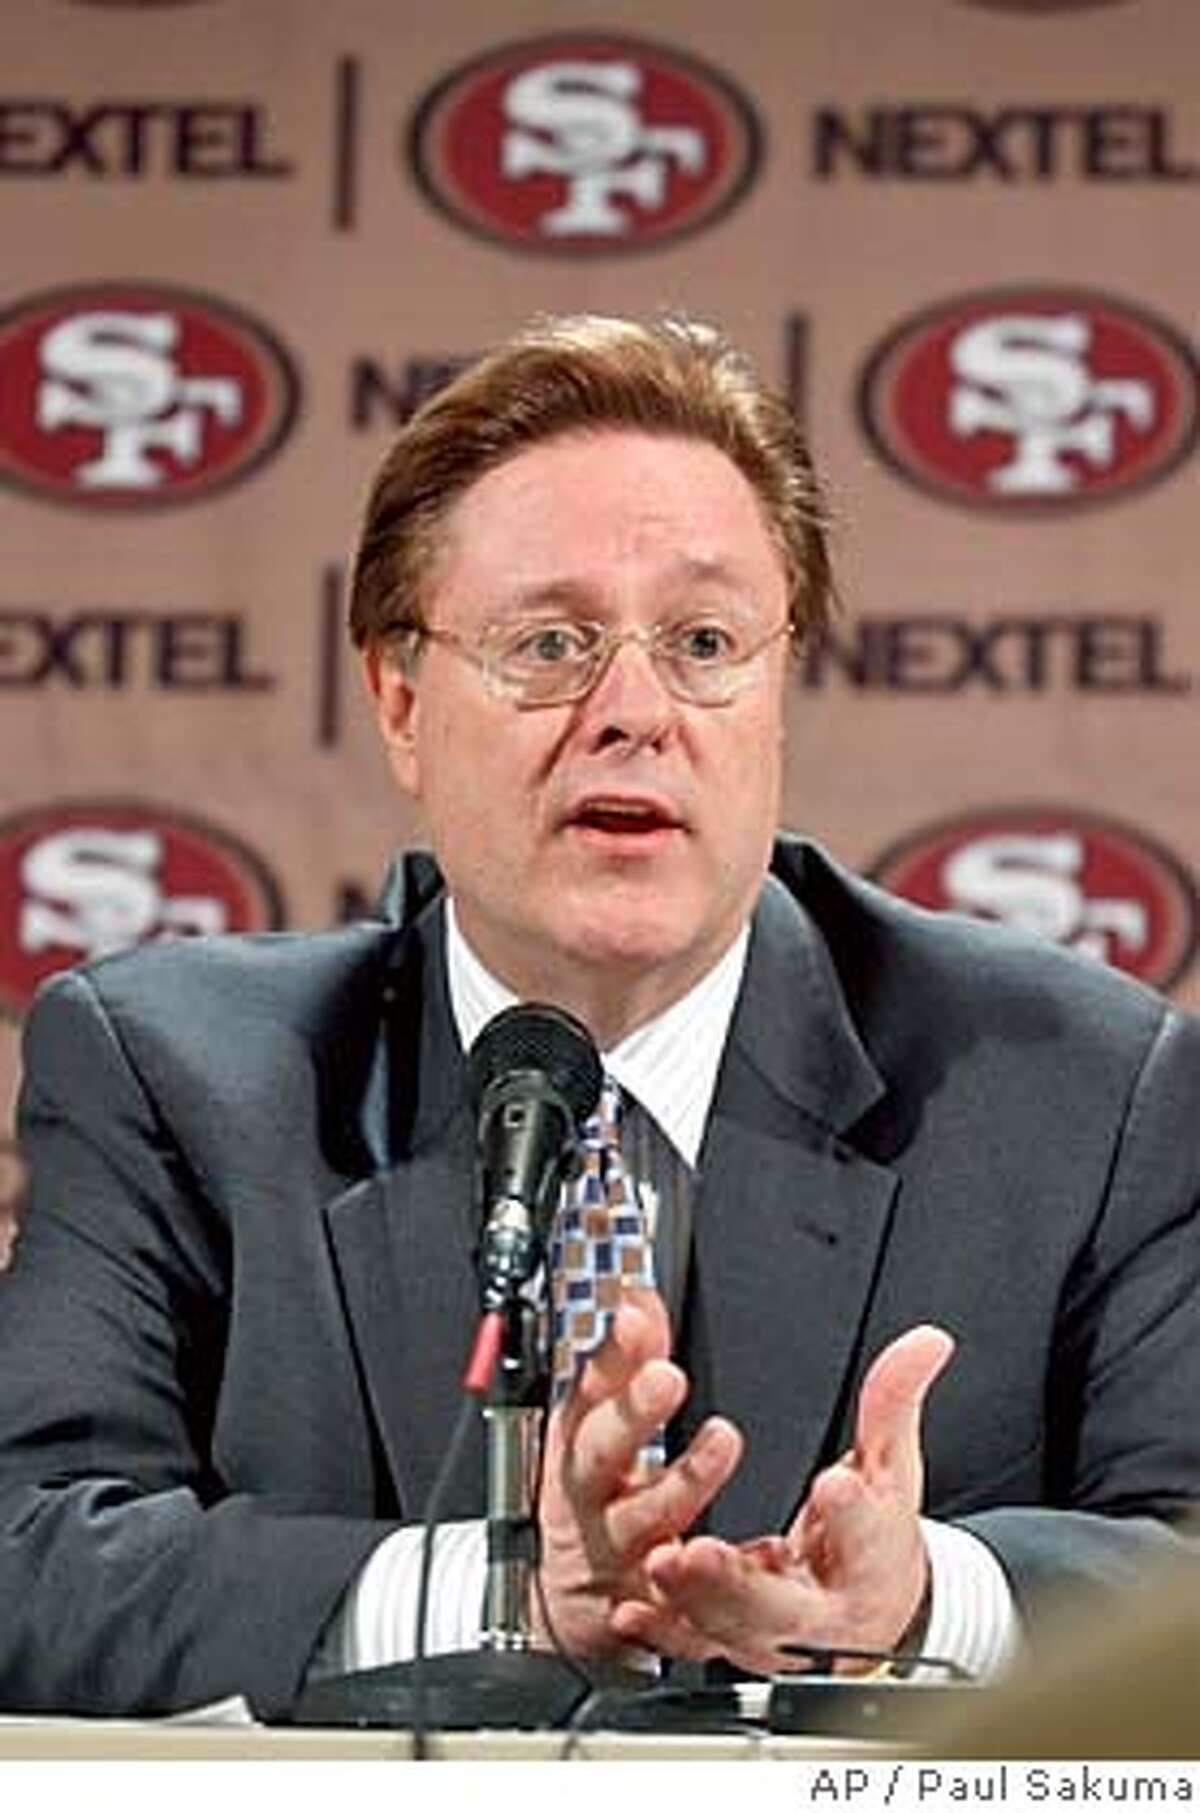 San Francisco 49ers owner John York announces that the 49ers fired coach Dennis Erickson and dismissed general manager Terry Donahue during a news conference at 49ers headquarters in Santa Clara, Calif., Jan. 5, 2005. The announcement came three days after the team finished the season with the NFL's worst record of 2-14. (AP Photo/Paul Sakuma)